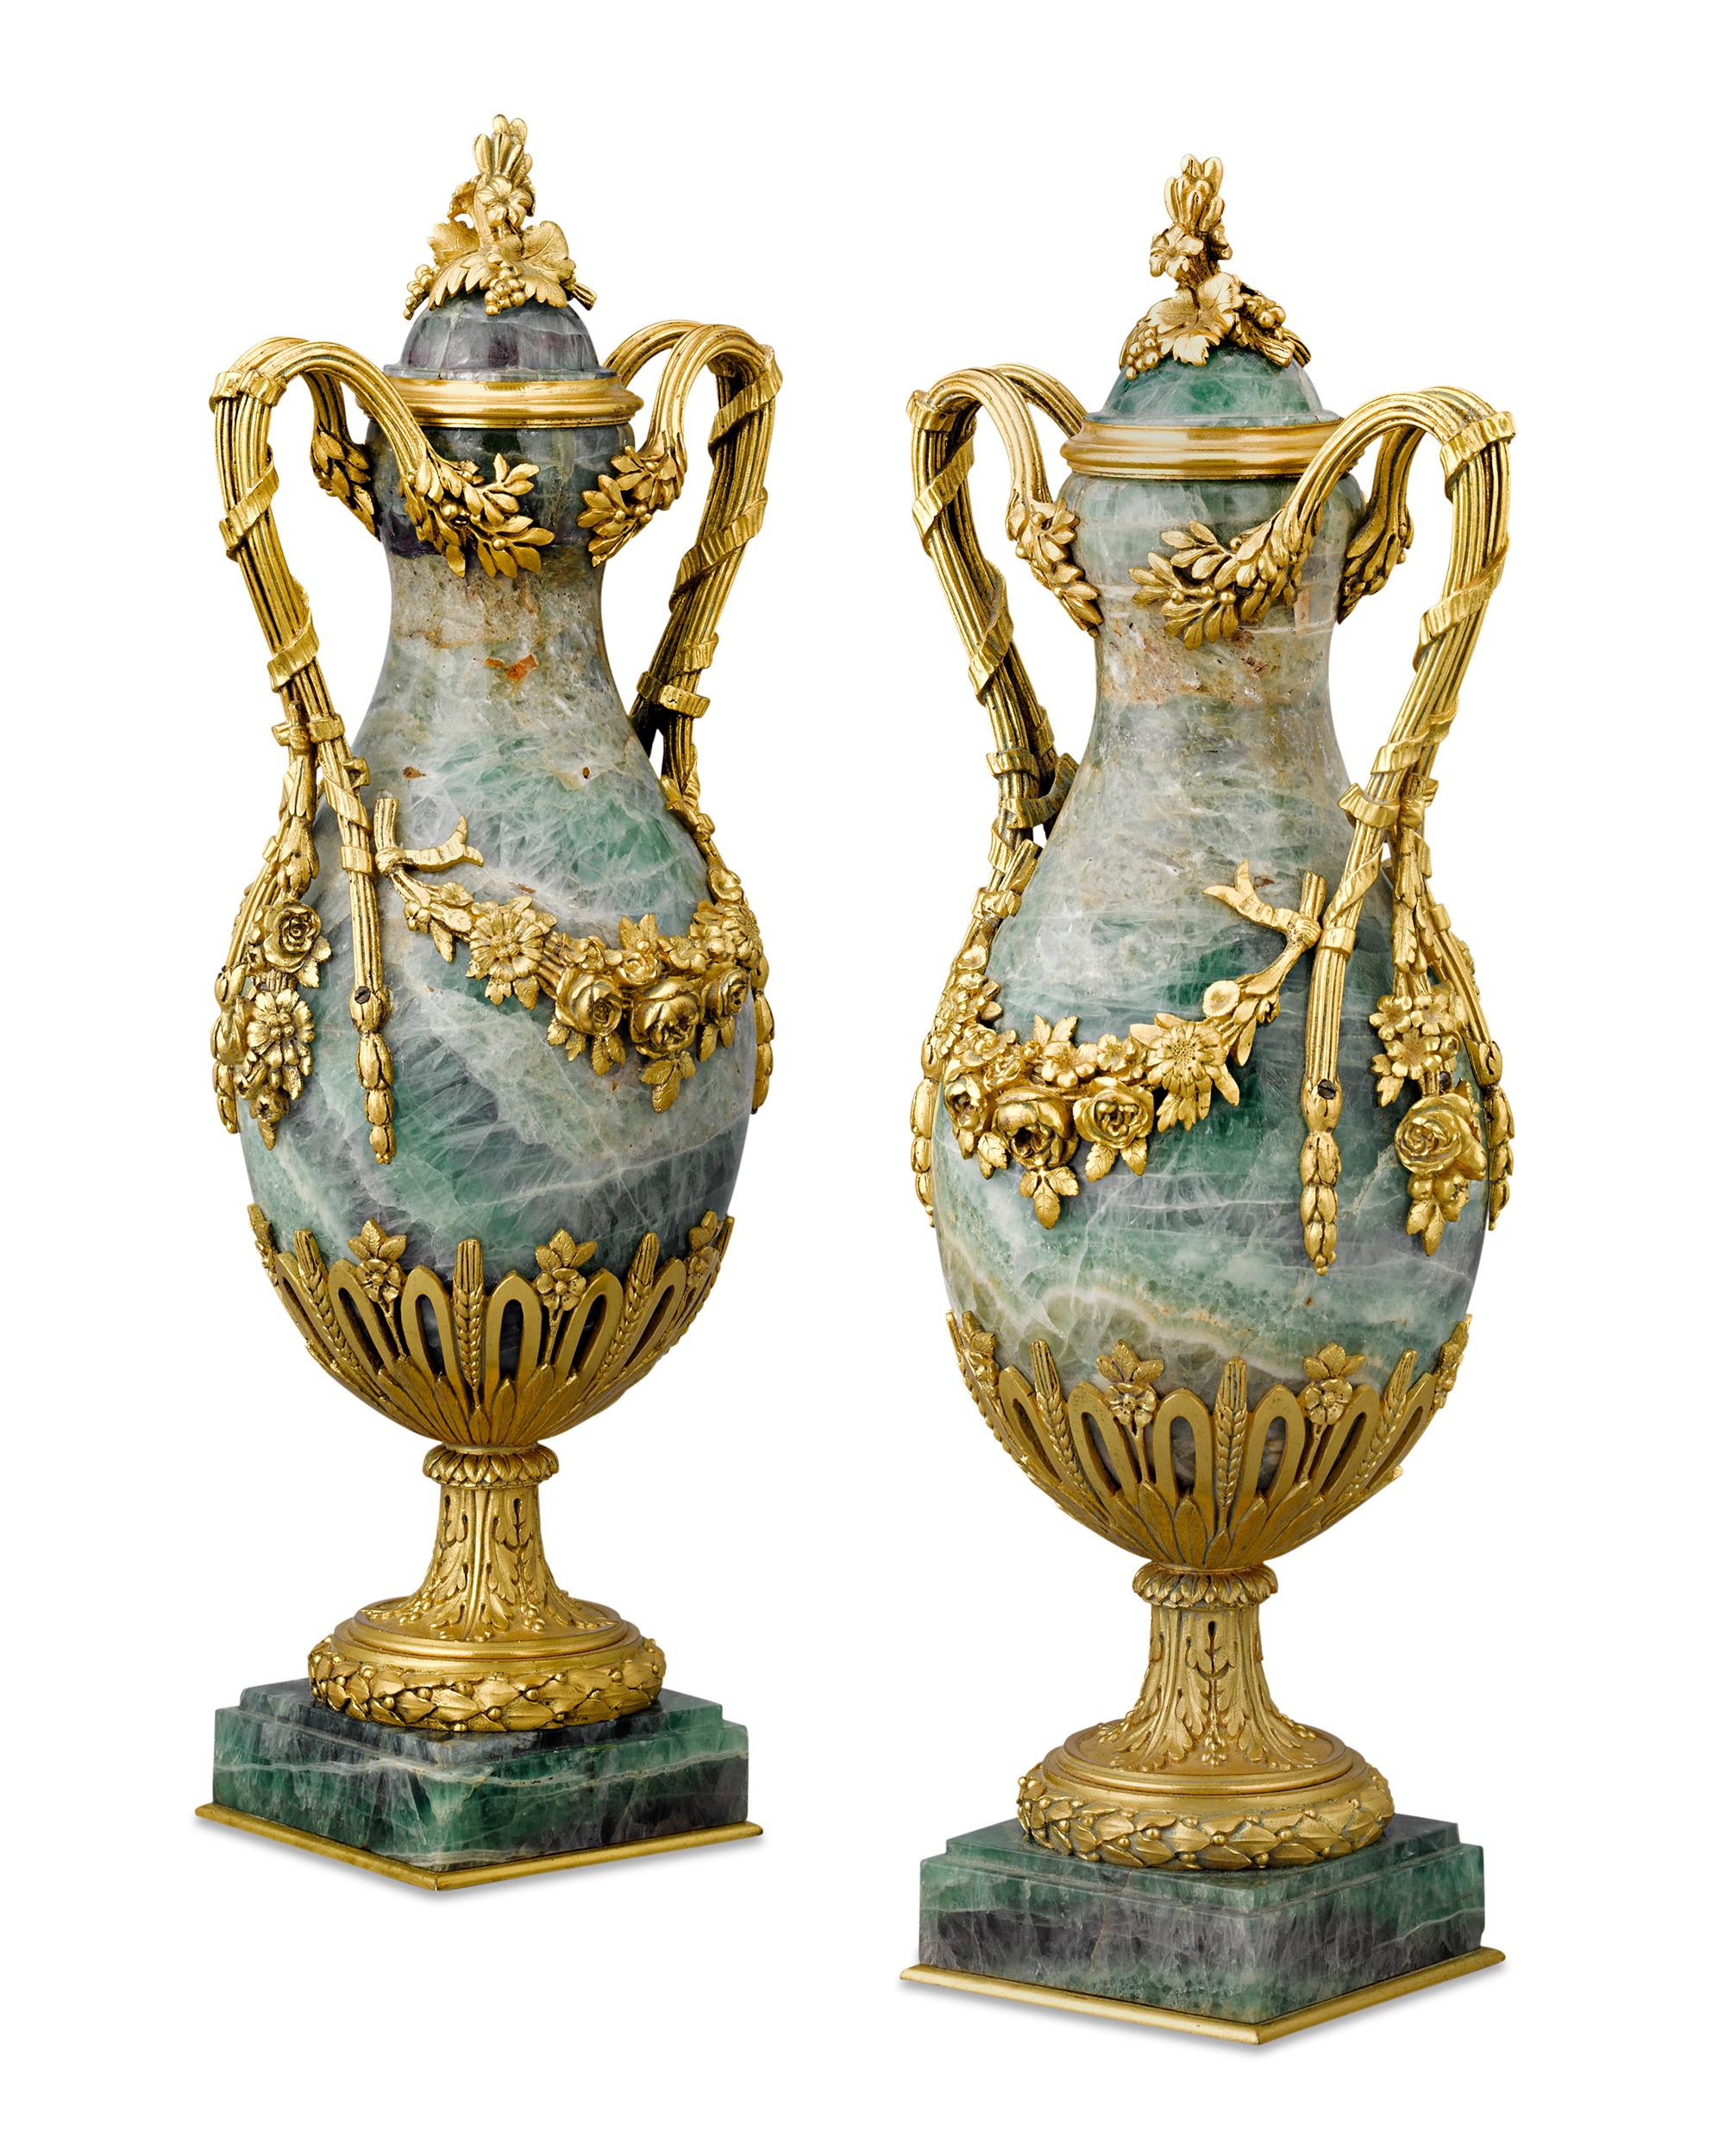 These Napoleon III French urns exemplify the elaborate revival styles that dominated the Second Empire. The baluster-form fluorspar vases are adorned by ormolu mounts in the form of twin handles and garlands of flowers and grapes, evoking the